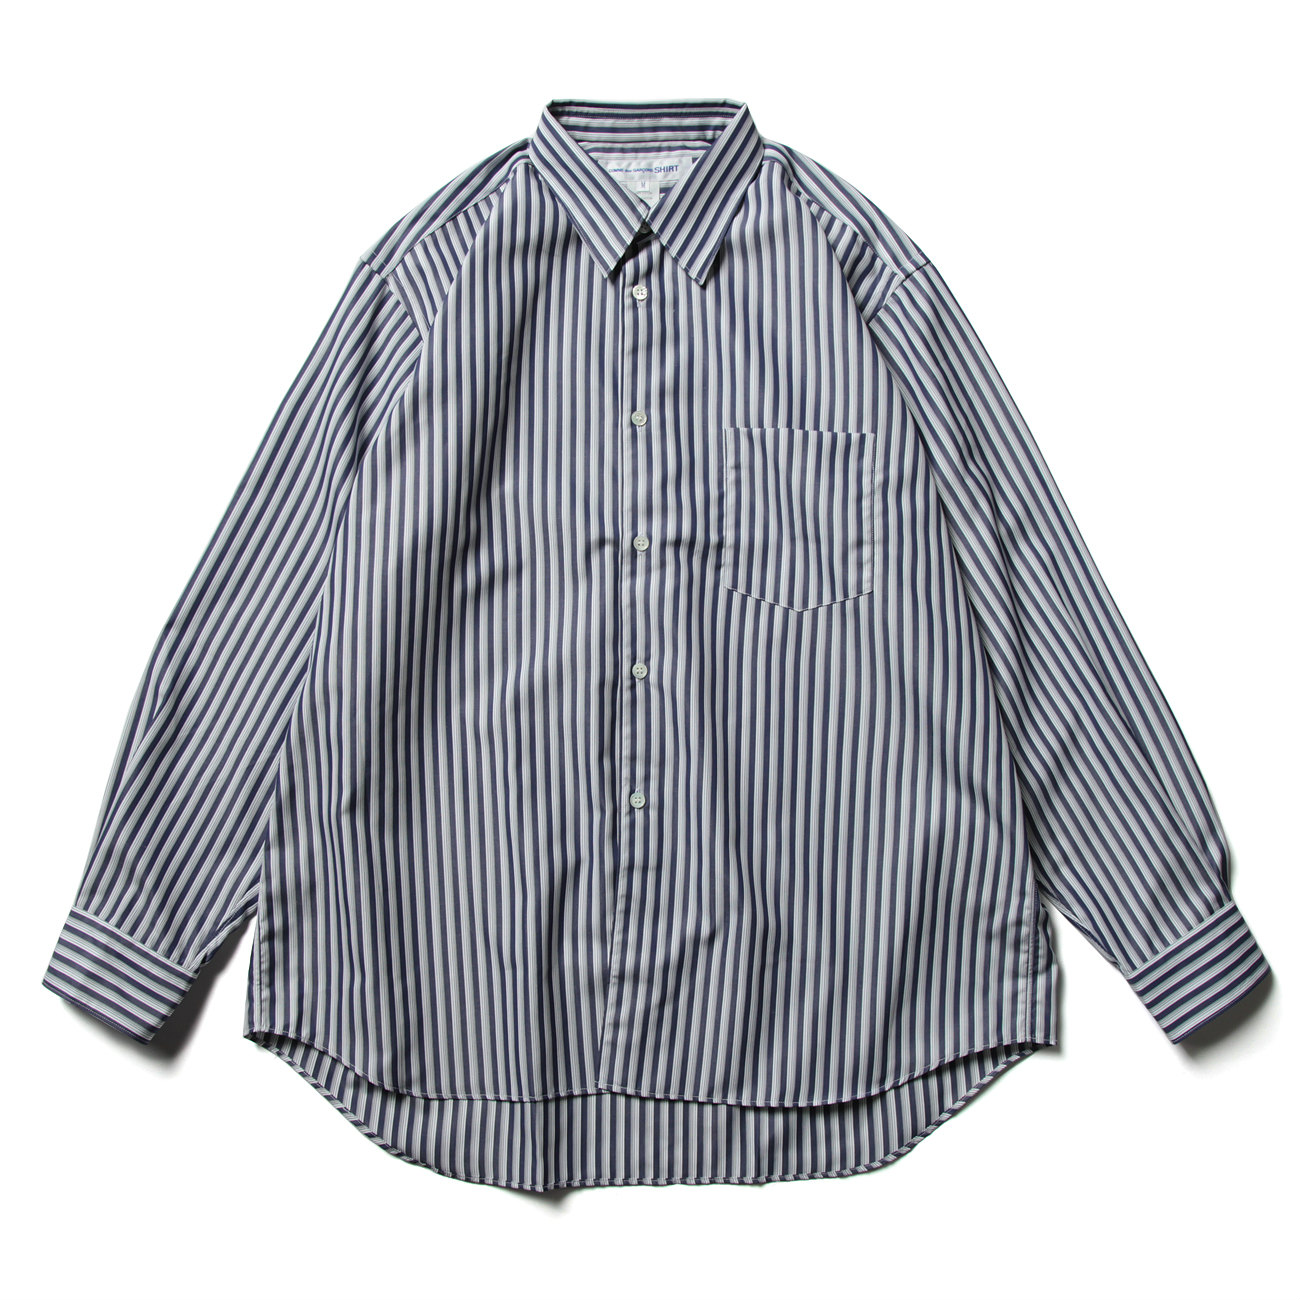 COMME des GARCONS SHIRT   FOREVER / Wide Classic   yarn dyed